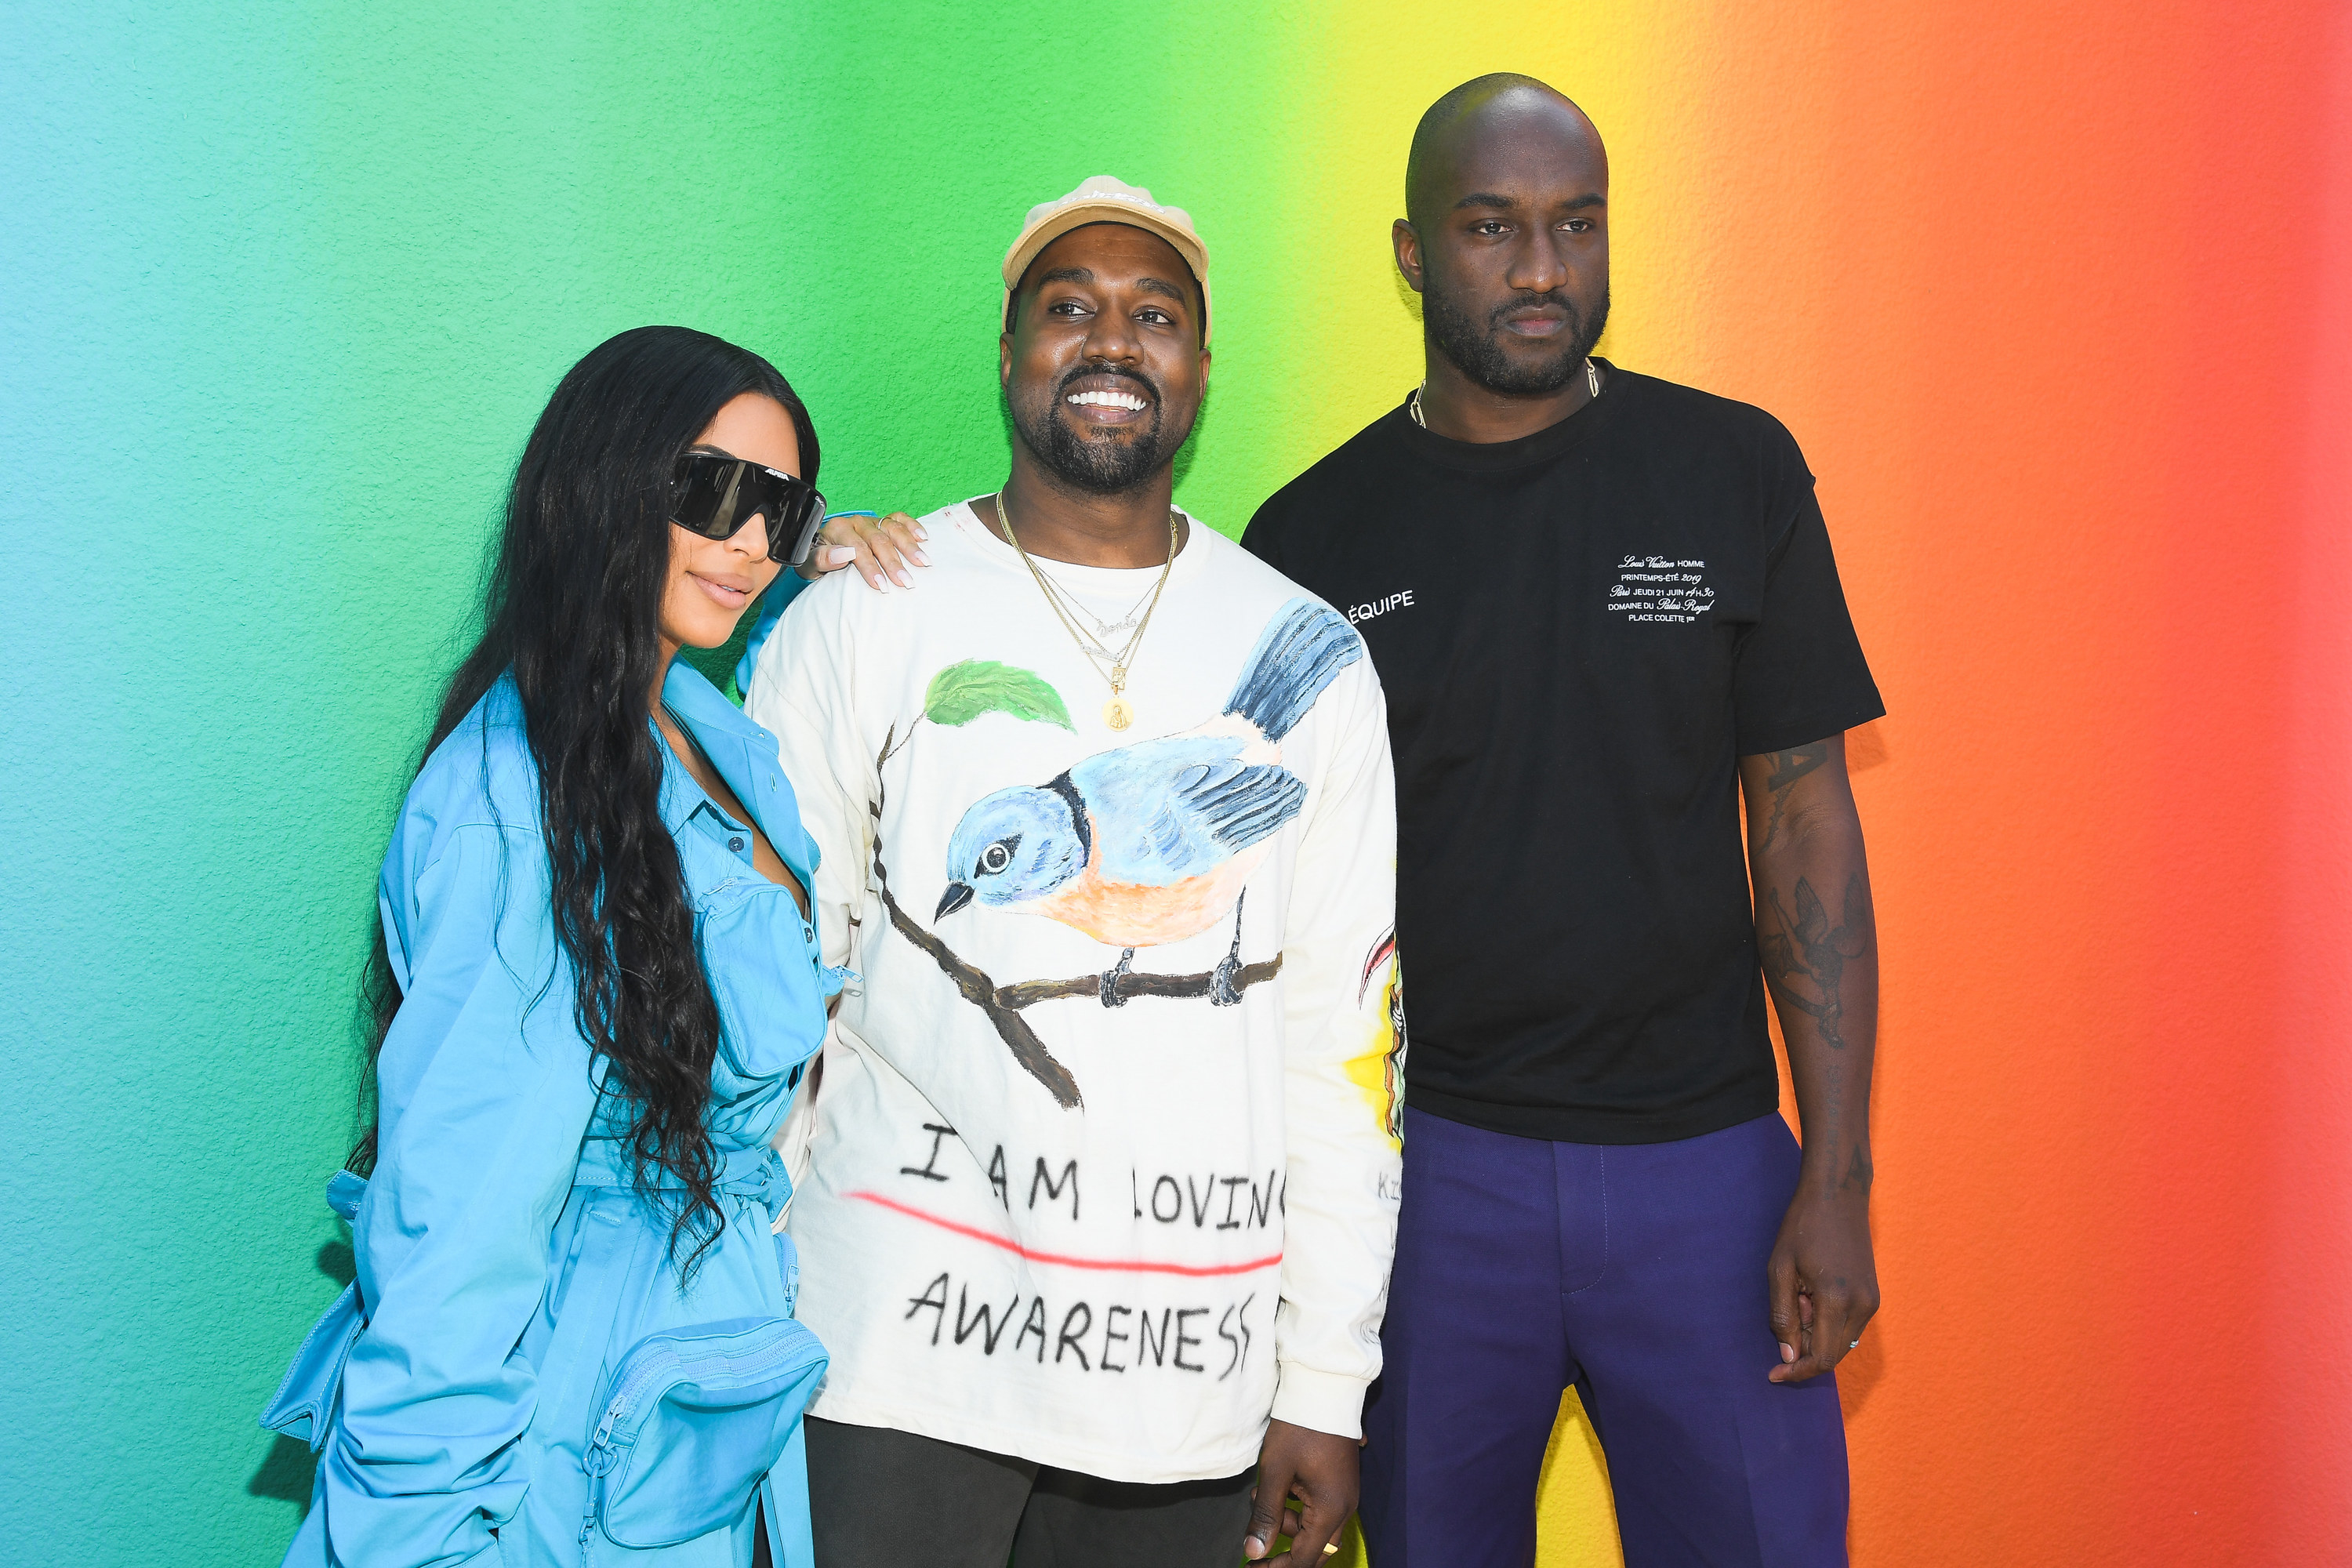 Wrath of Twitter heaped upon designer Virgil Abloh for $50 donation to bail  fund – New York Daily News